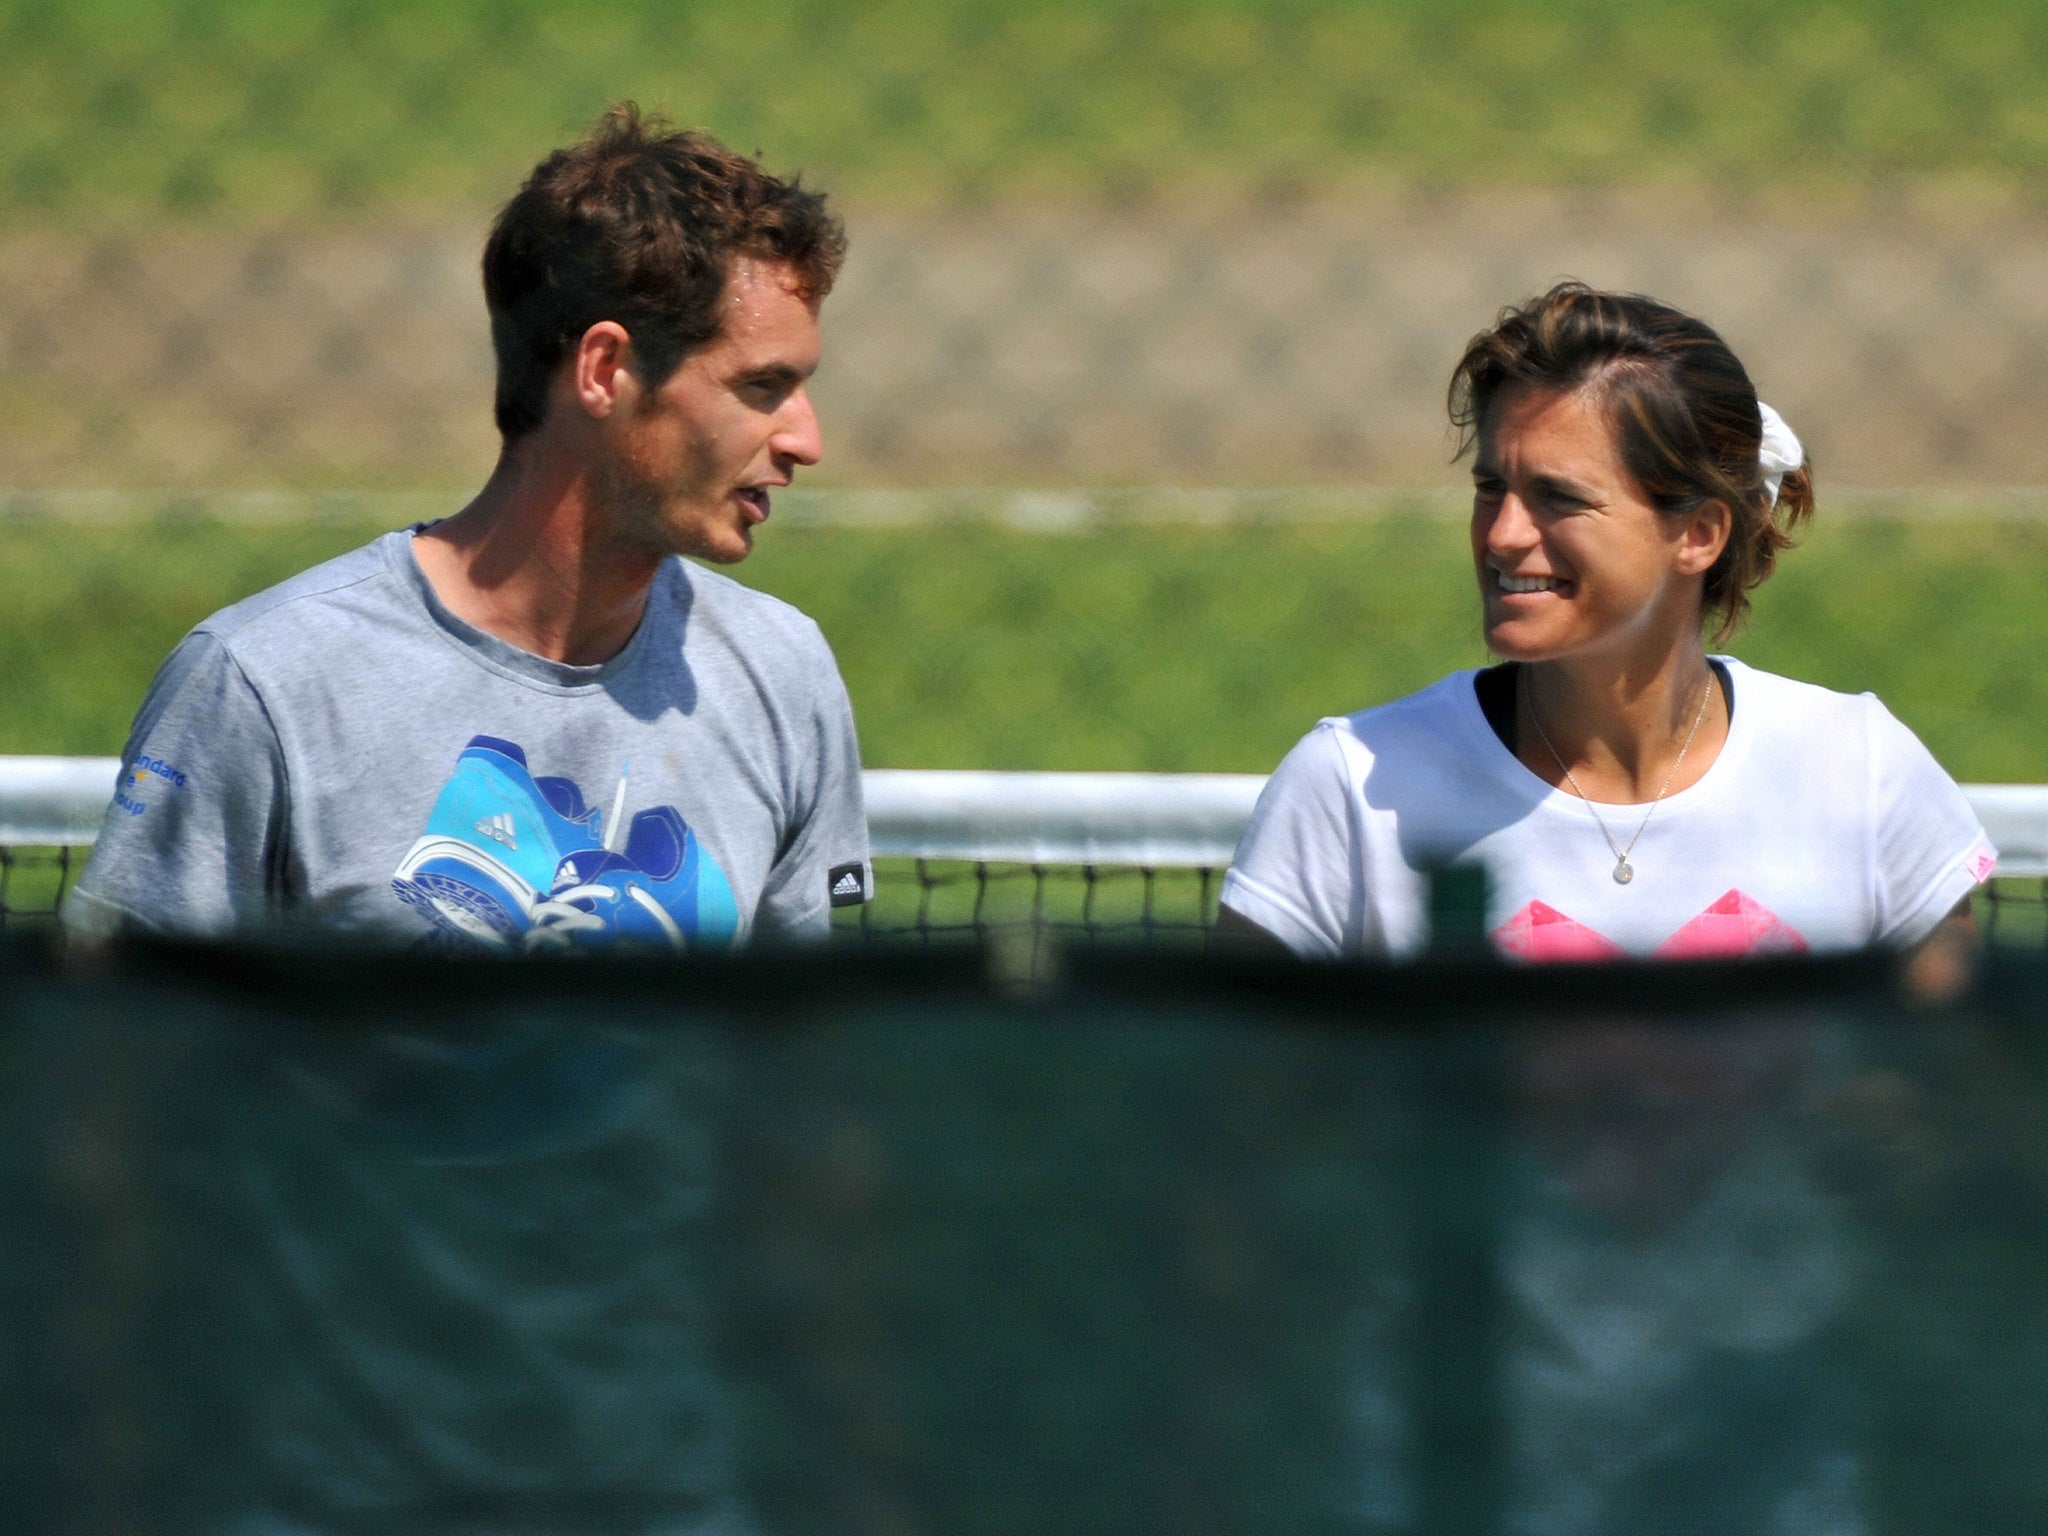 Britain's Andy Murray (L) talks with his French coach Amelie Mauresmo (R) during a session on the practice courts in Wimbledon.